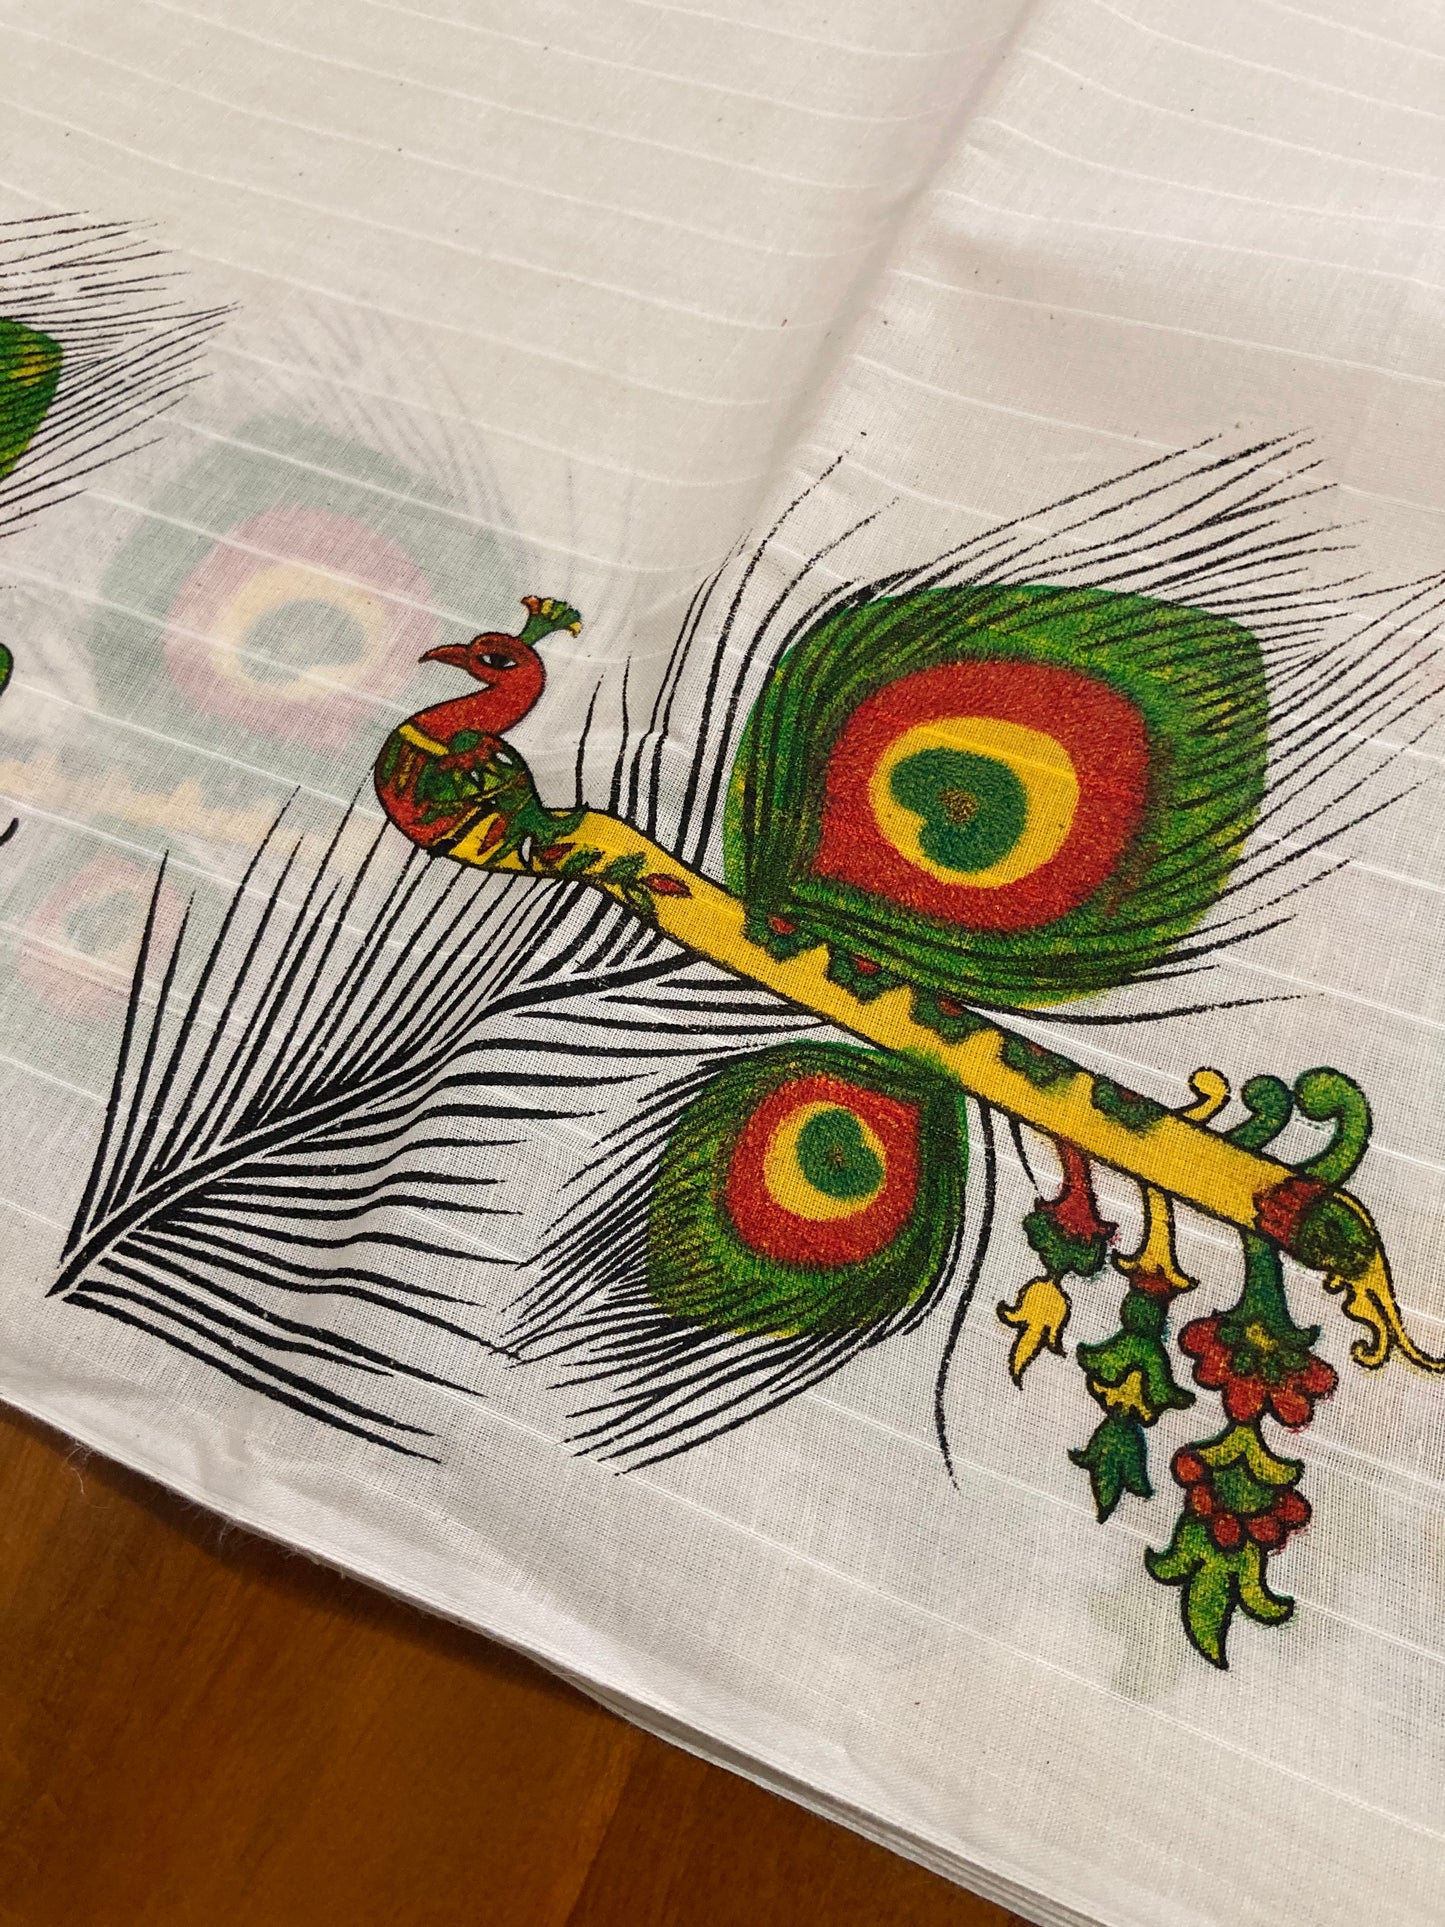 Kerala Cotton Churidar Salwar Material with Mural Printed Peacock Feather and Flute Design (include Striped Shawl / Dupatta)